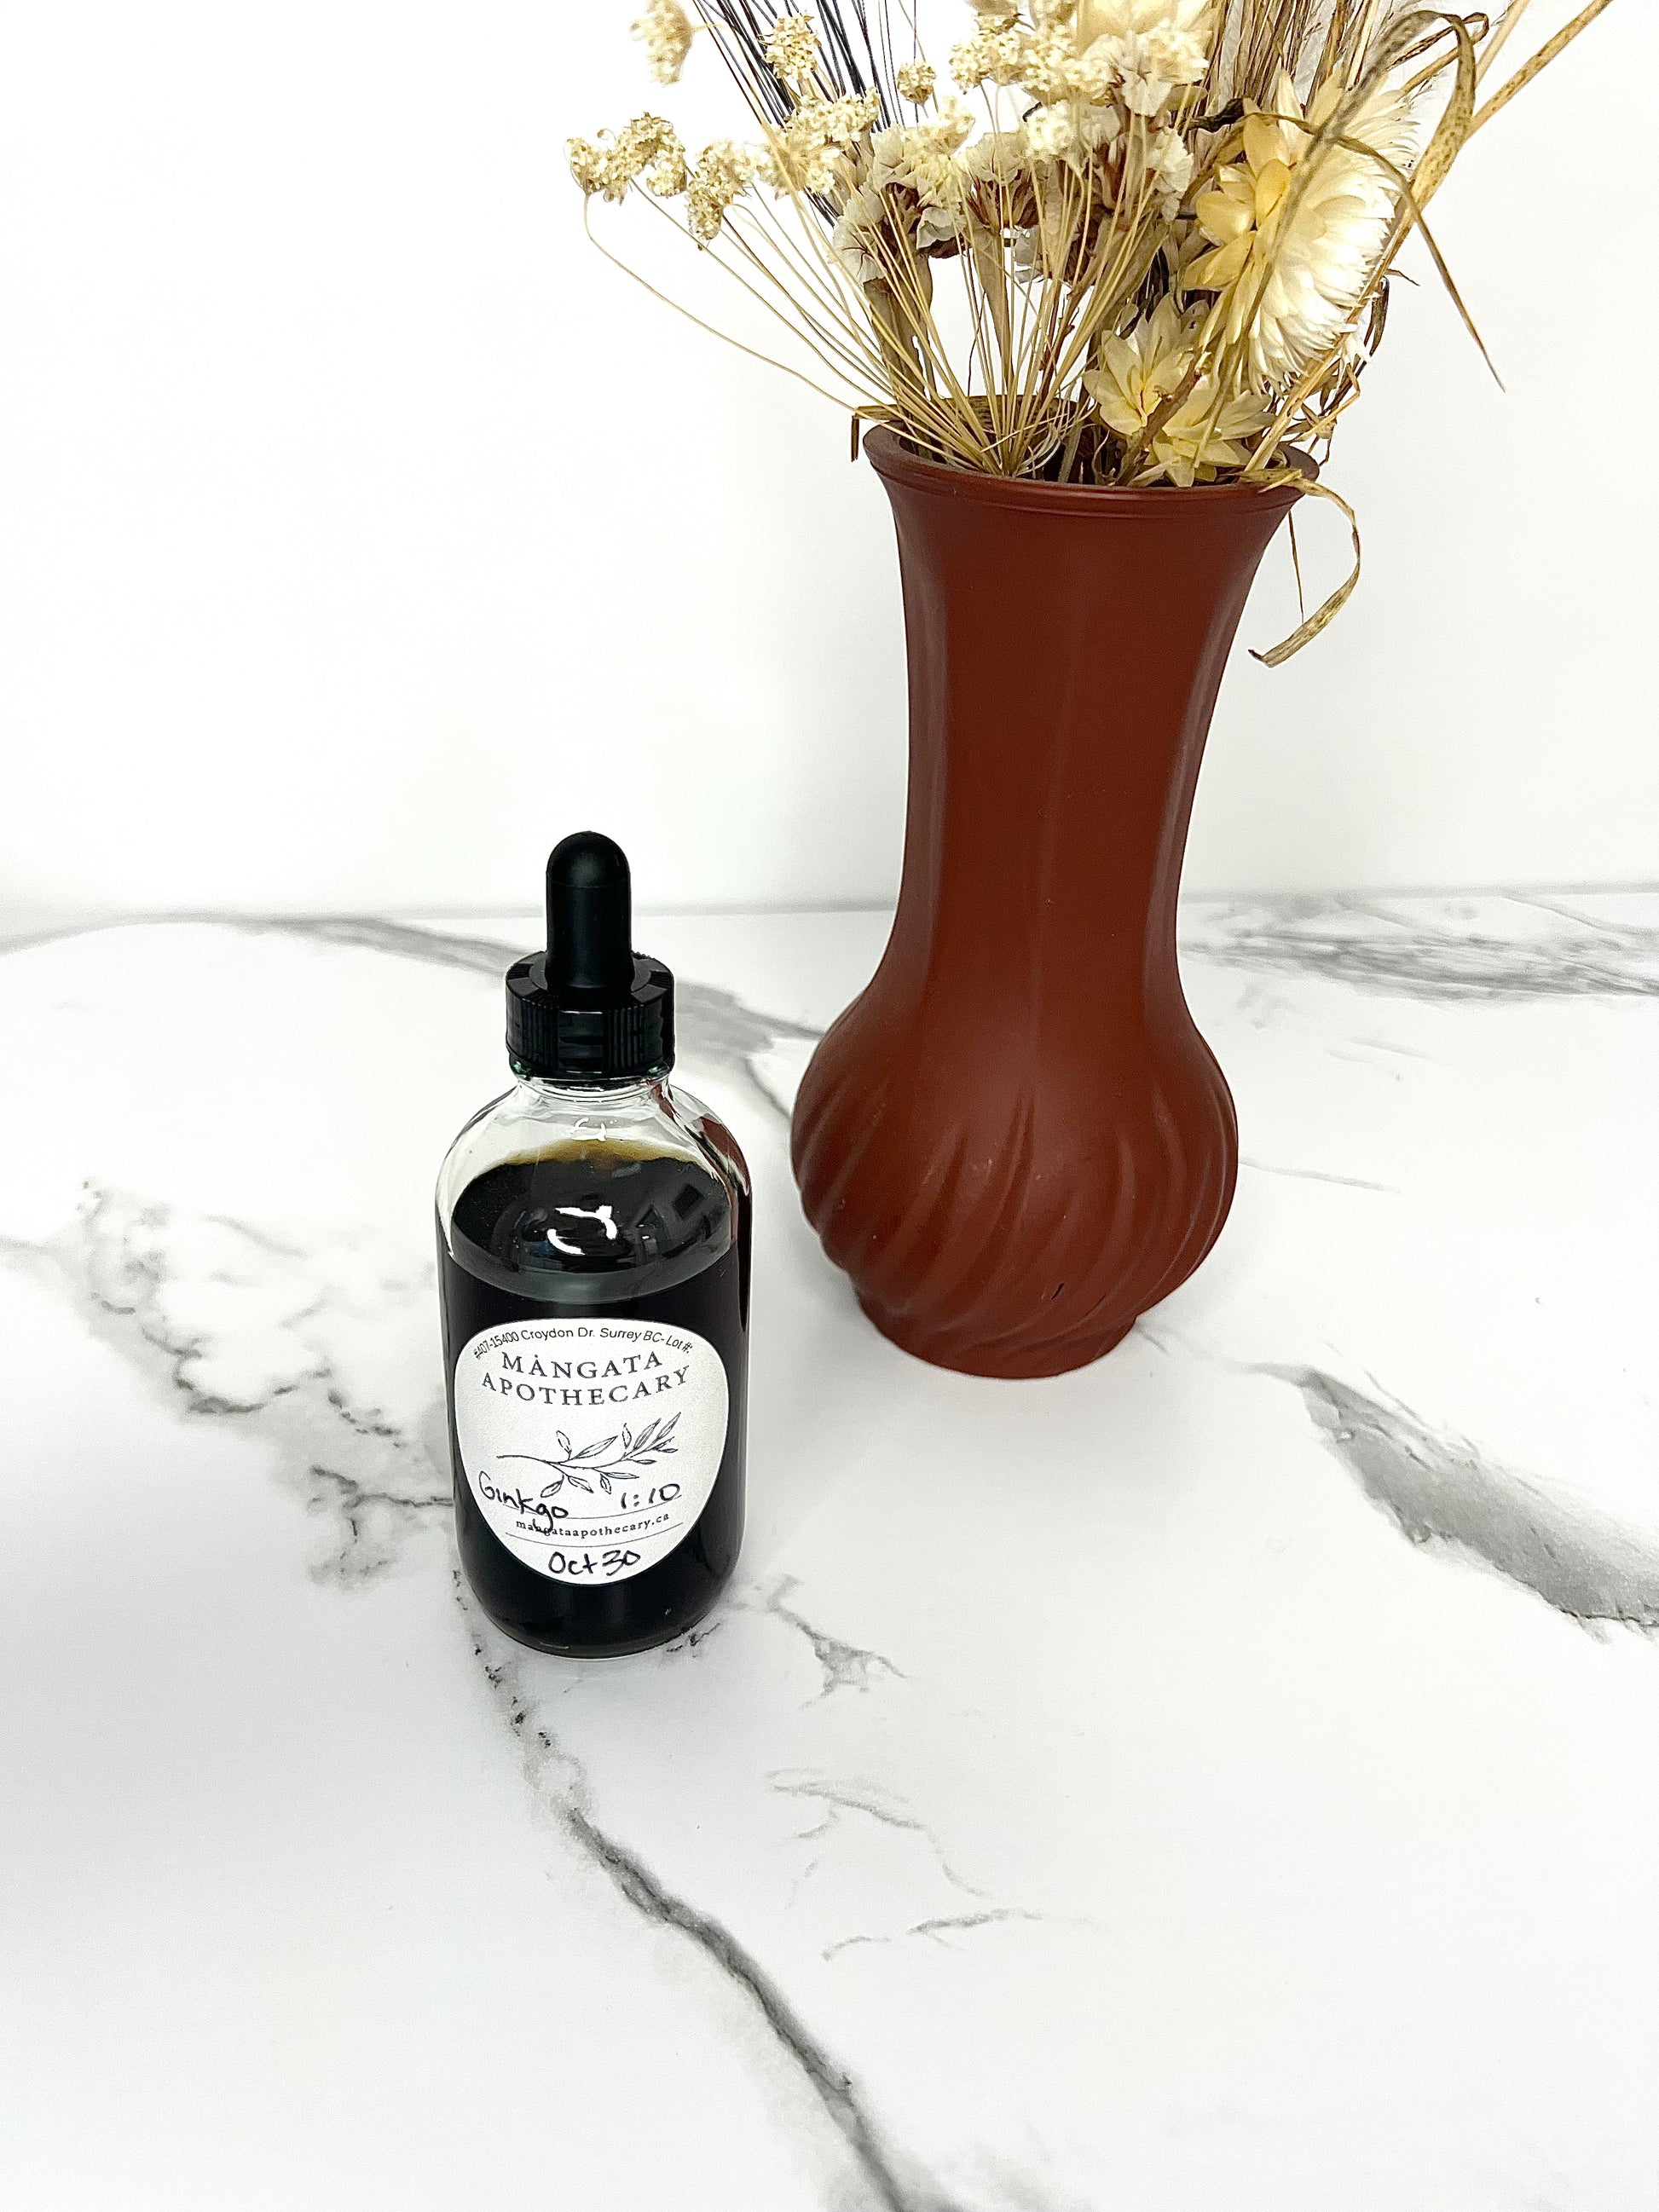 Ginkgo Tincture - Product Image For Mangata Dispensary